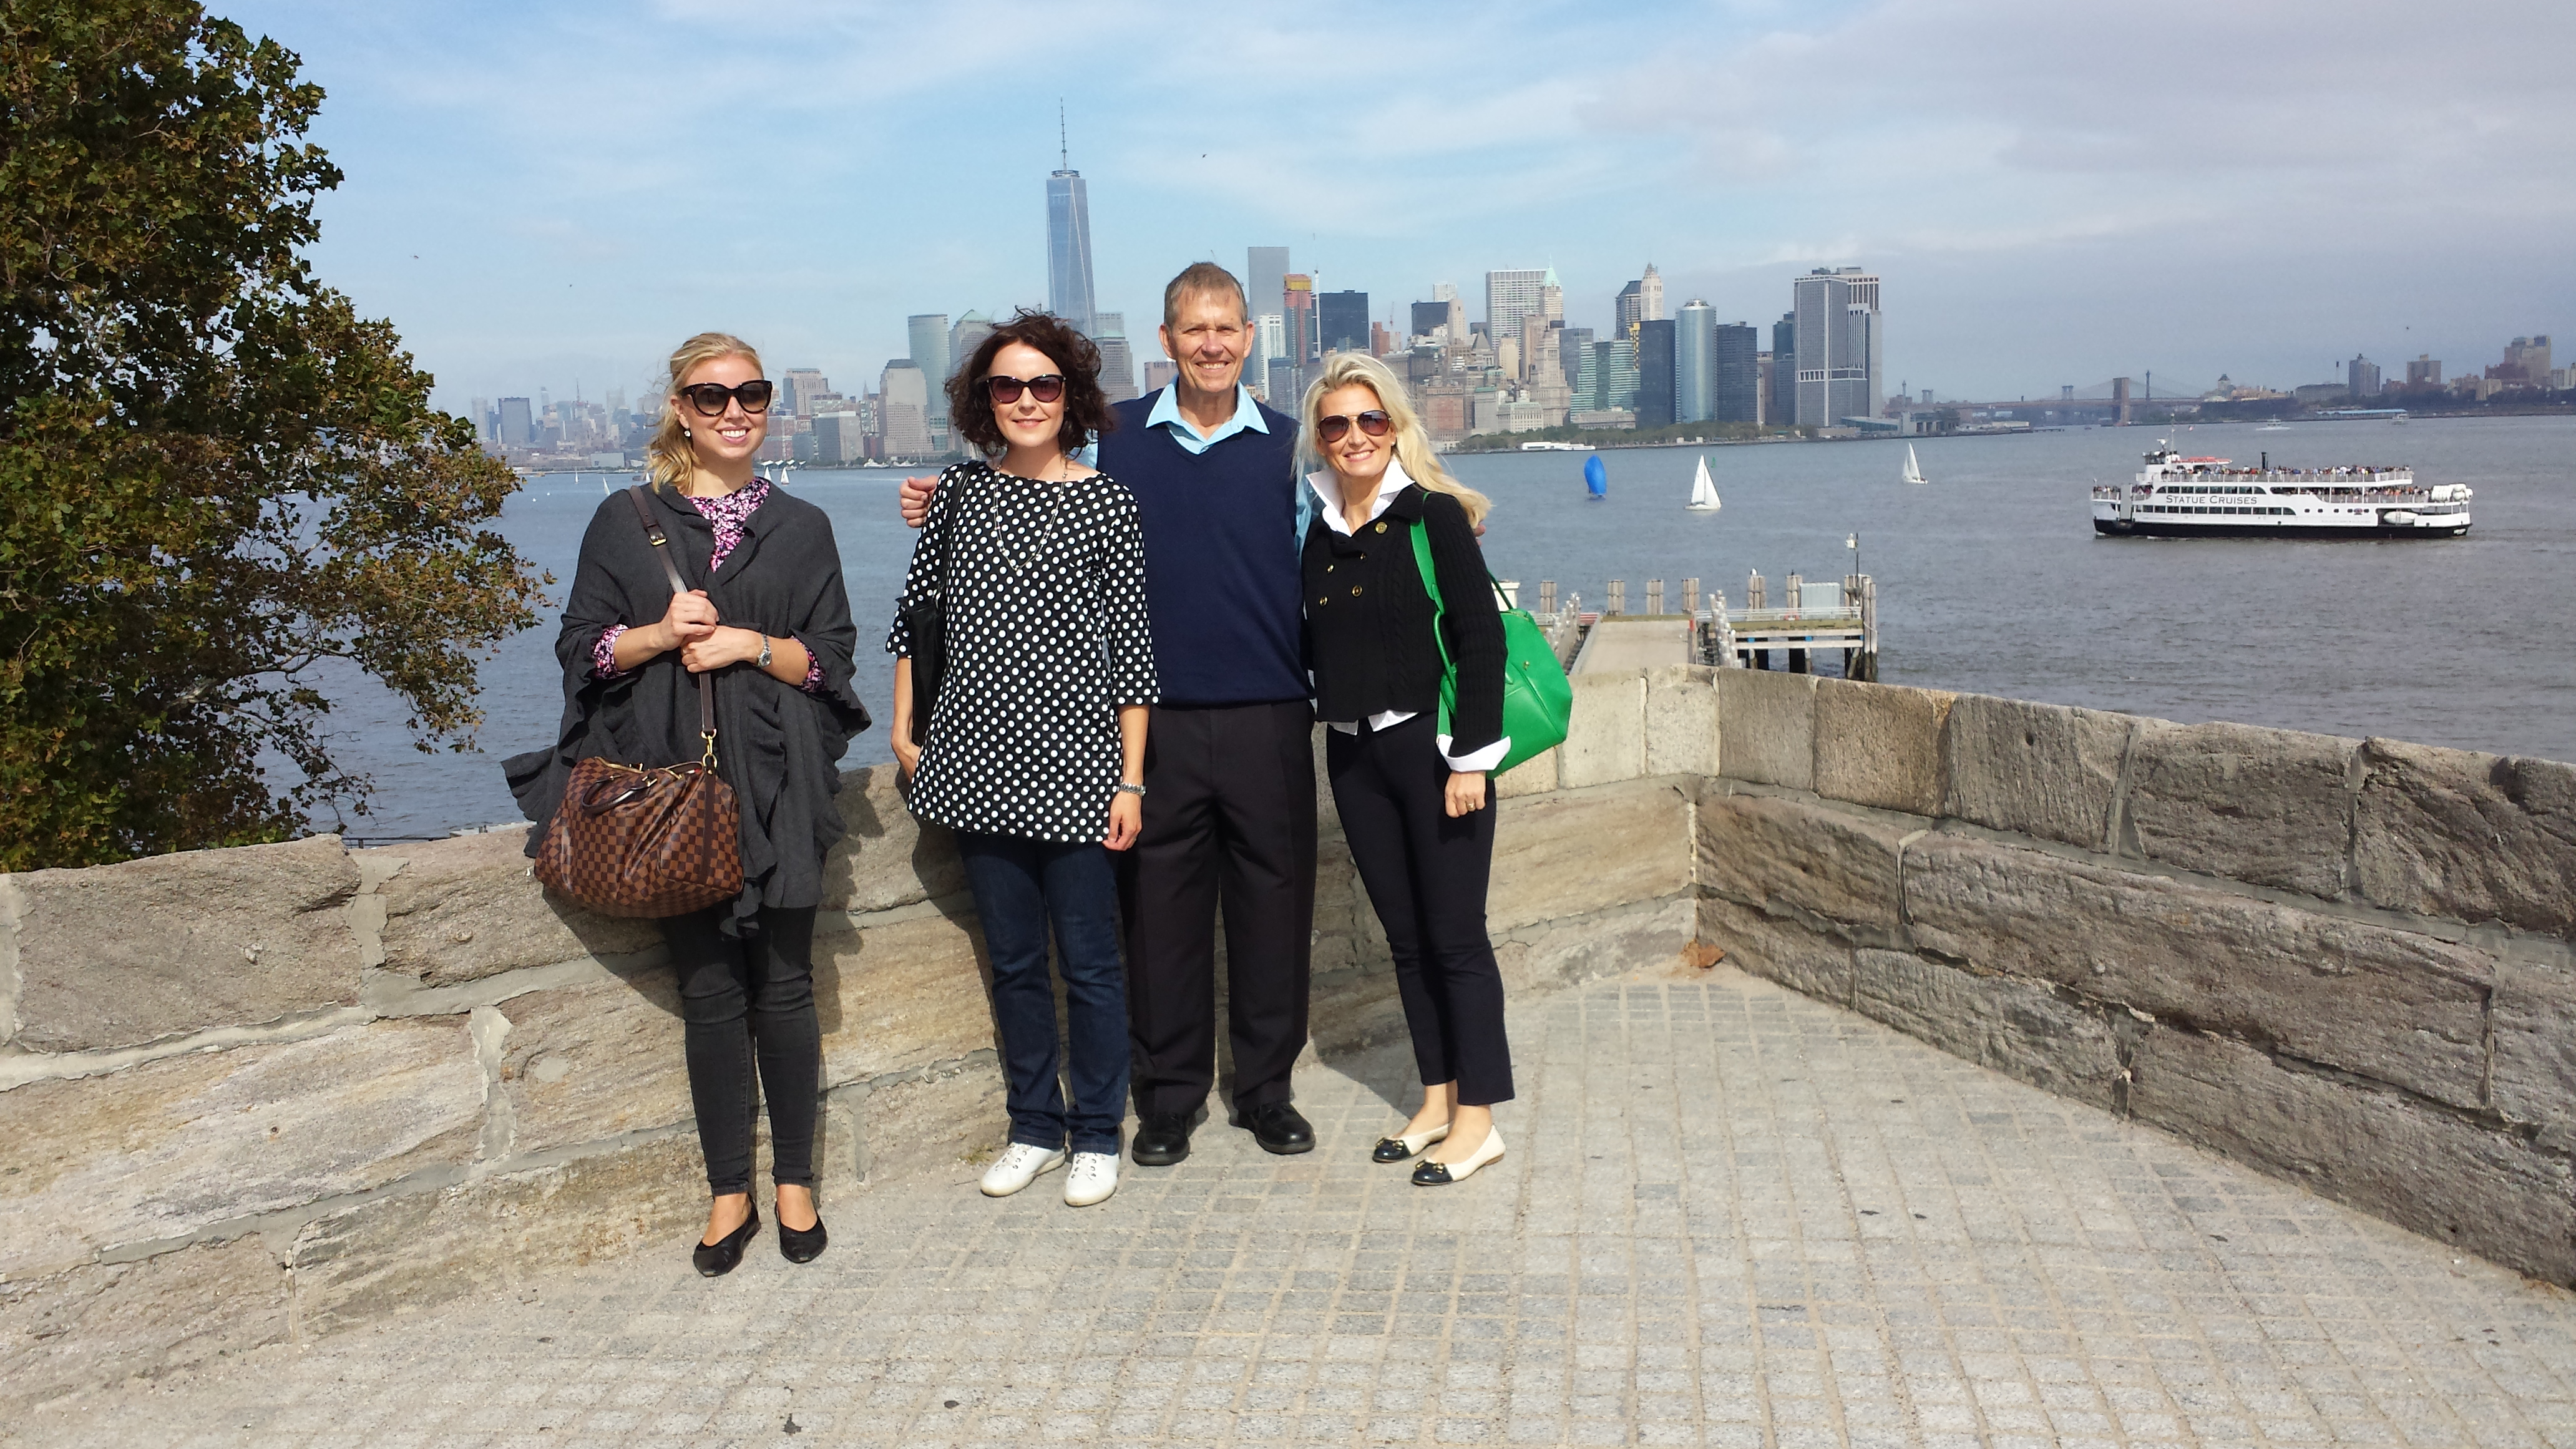 Deputy Consul General of Finland to New York, Anna Yletyinen, the First Lady of Finland, Jenni Haukio, president of Finnish-American Lawyers Association, Robert Saasto and Dr. Erika Sauer visited Ellis Island and the Statue of Liberty.